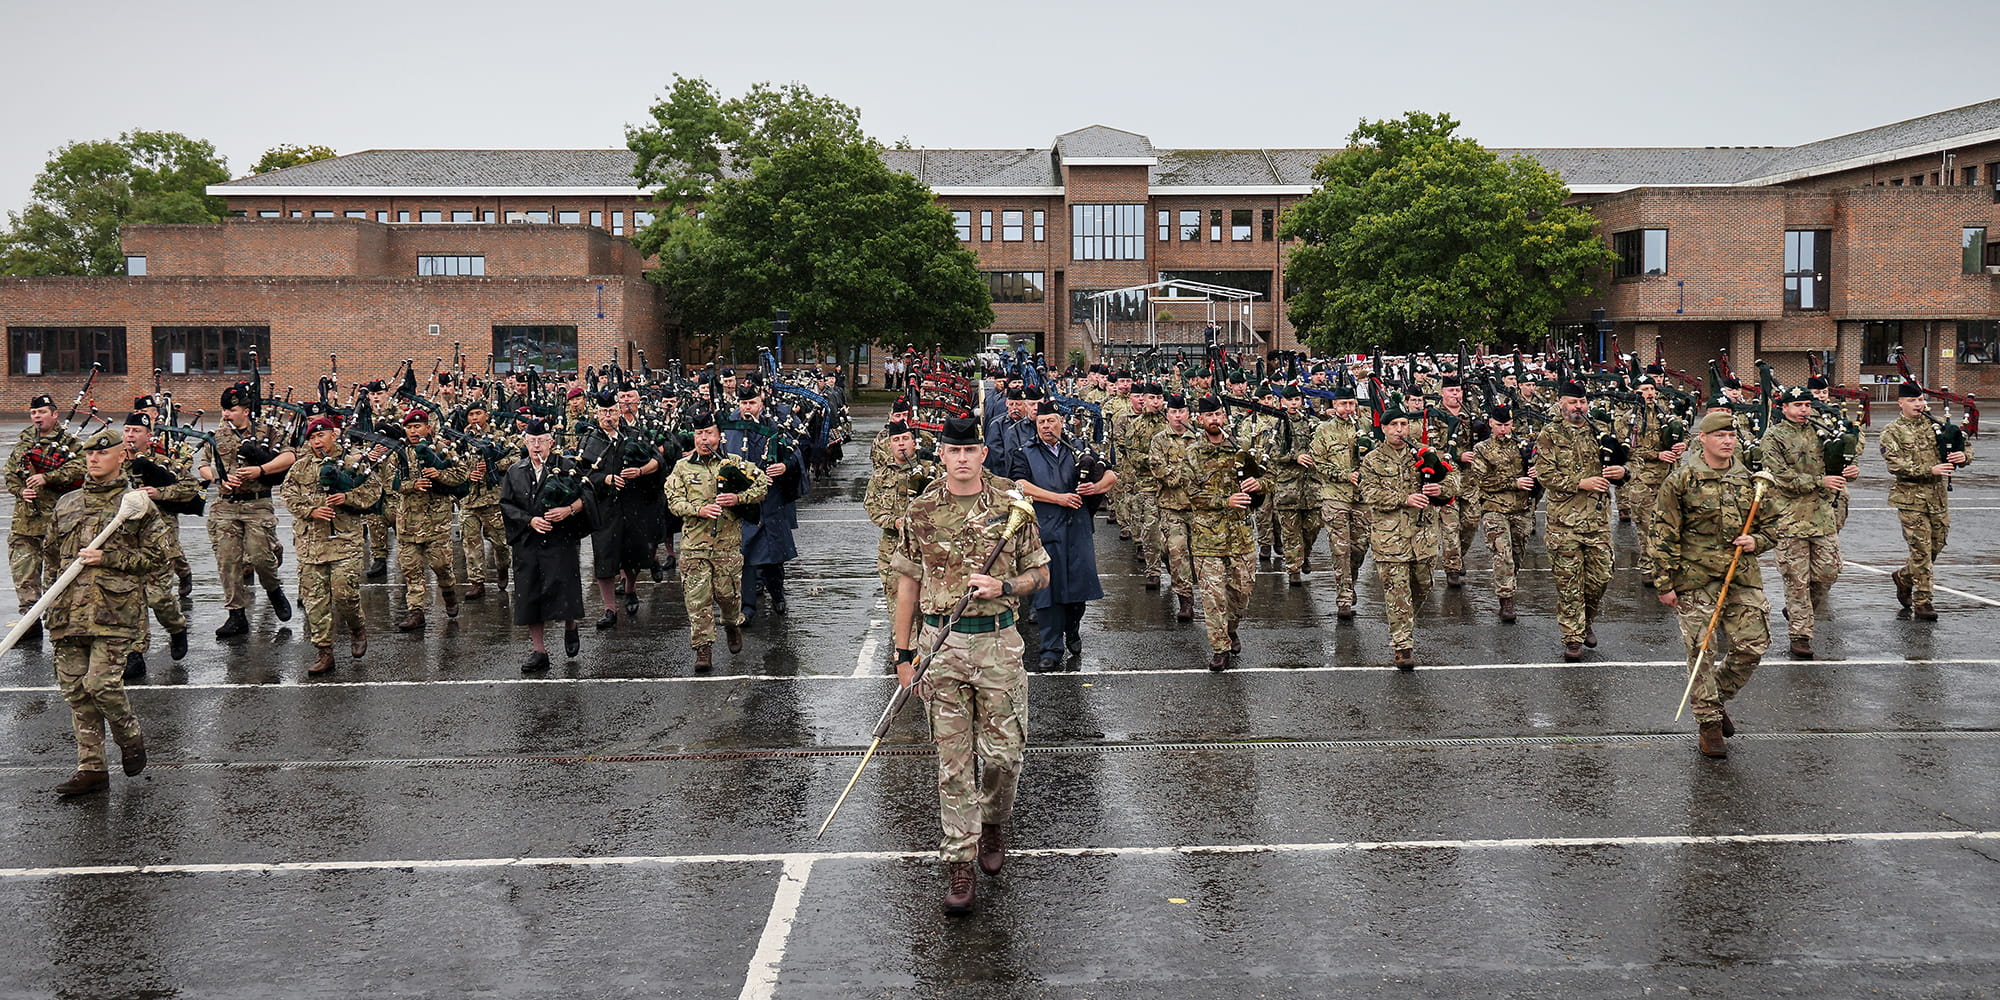 Soldiers in HMS Collingwood conducting State Ceremonial Training